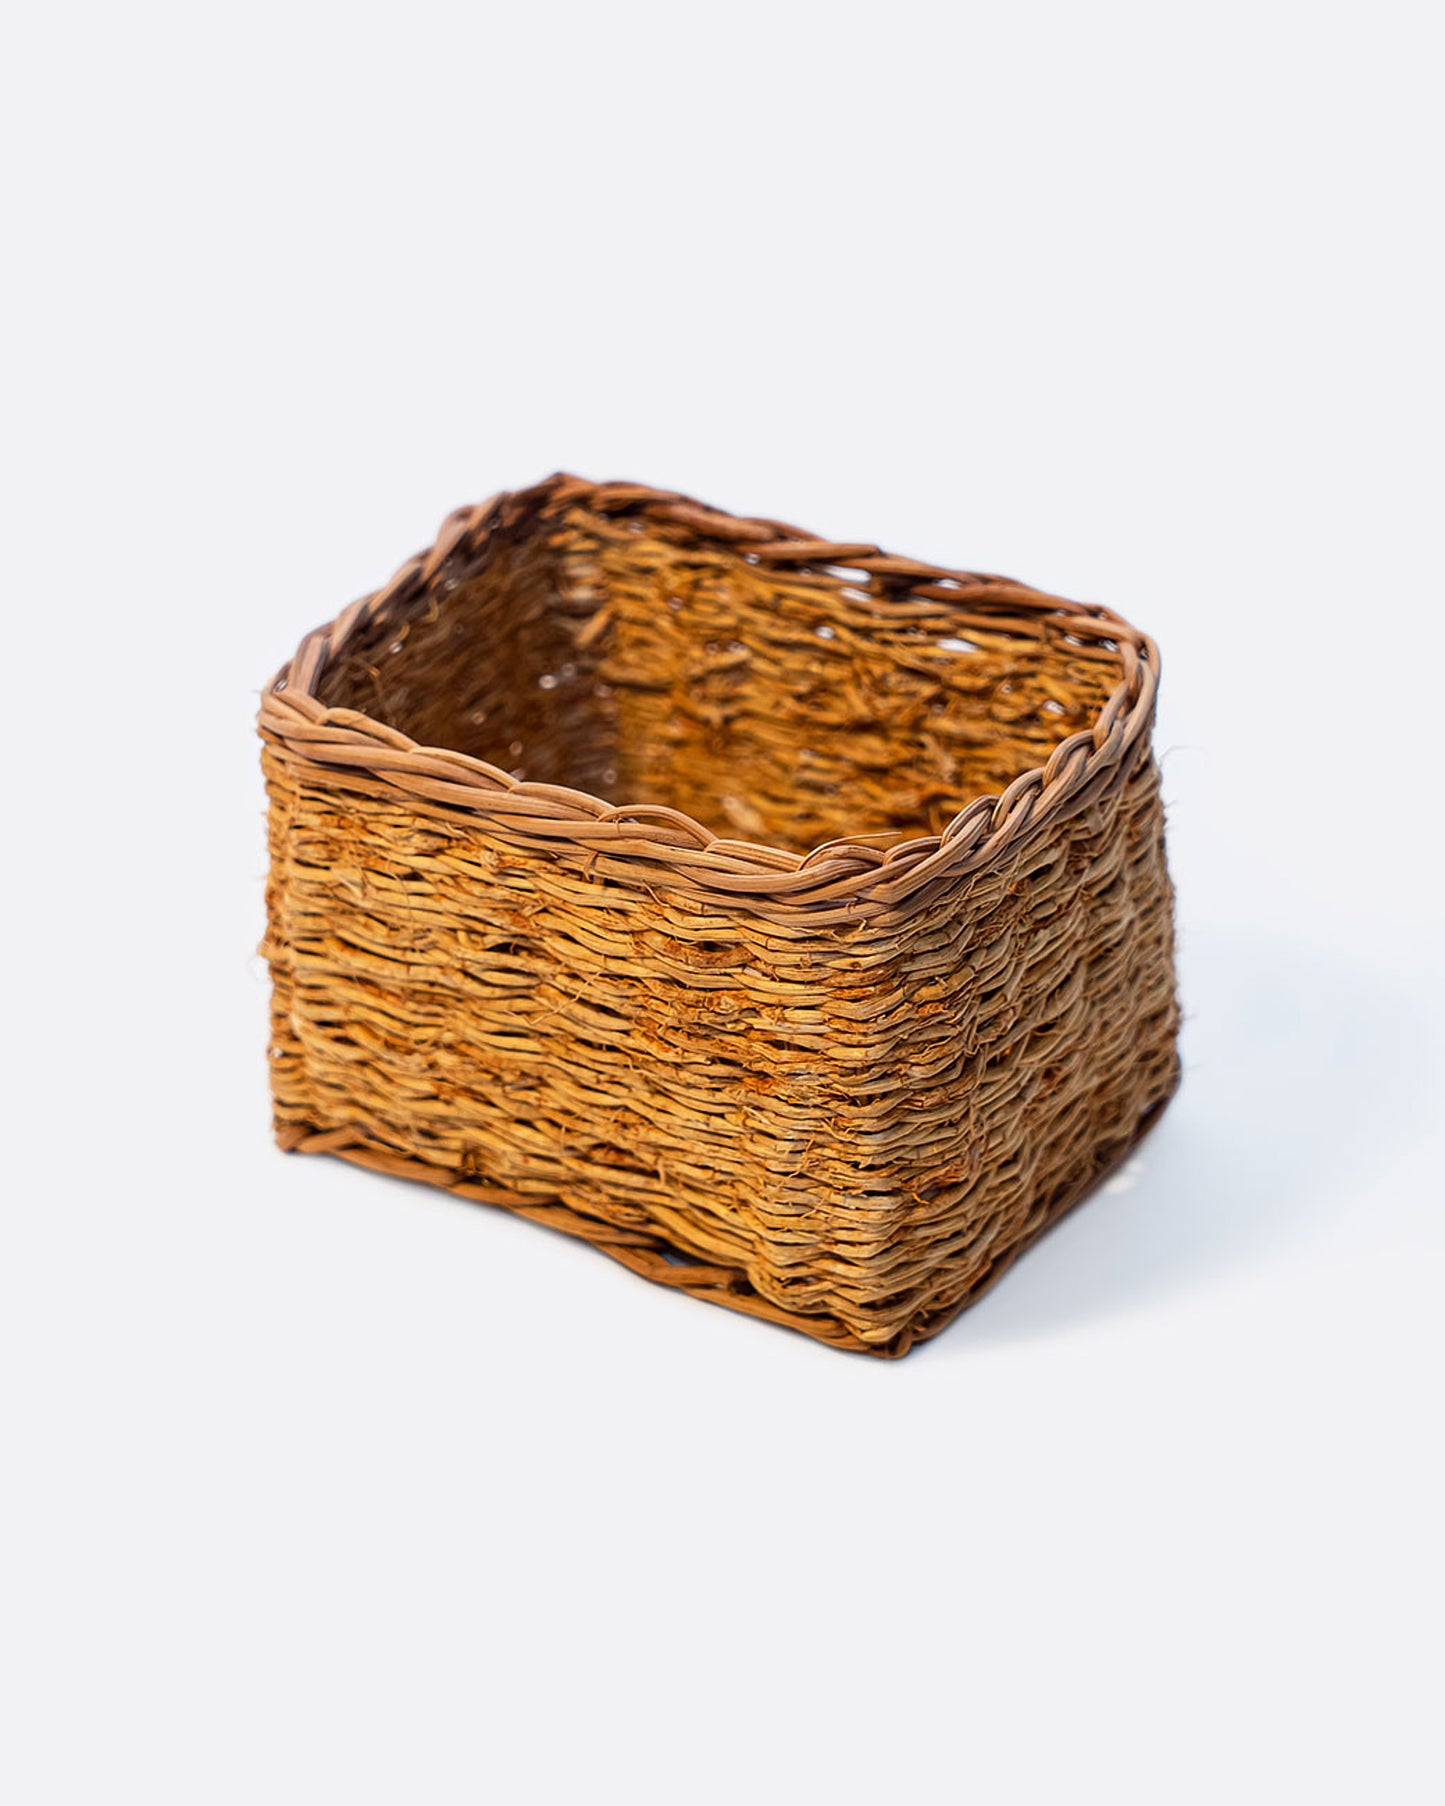 Small size vetiver basket.